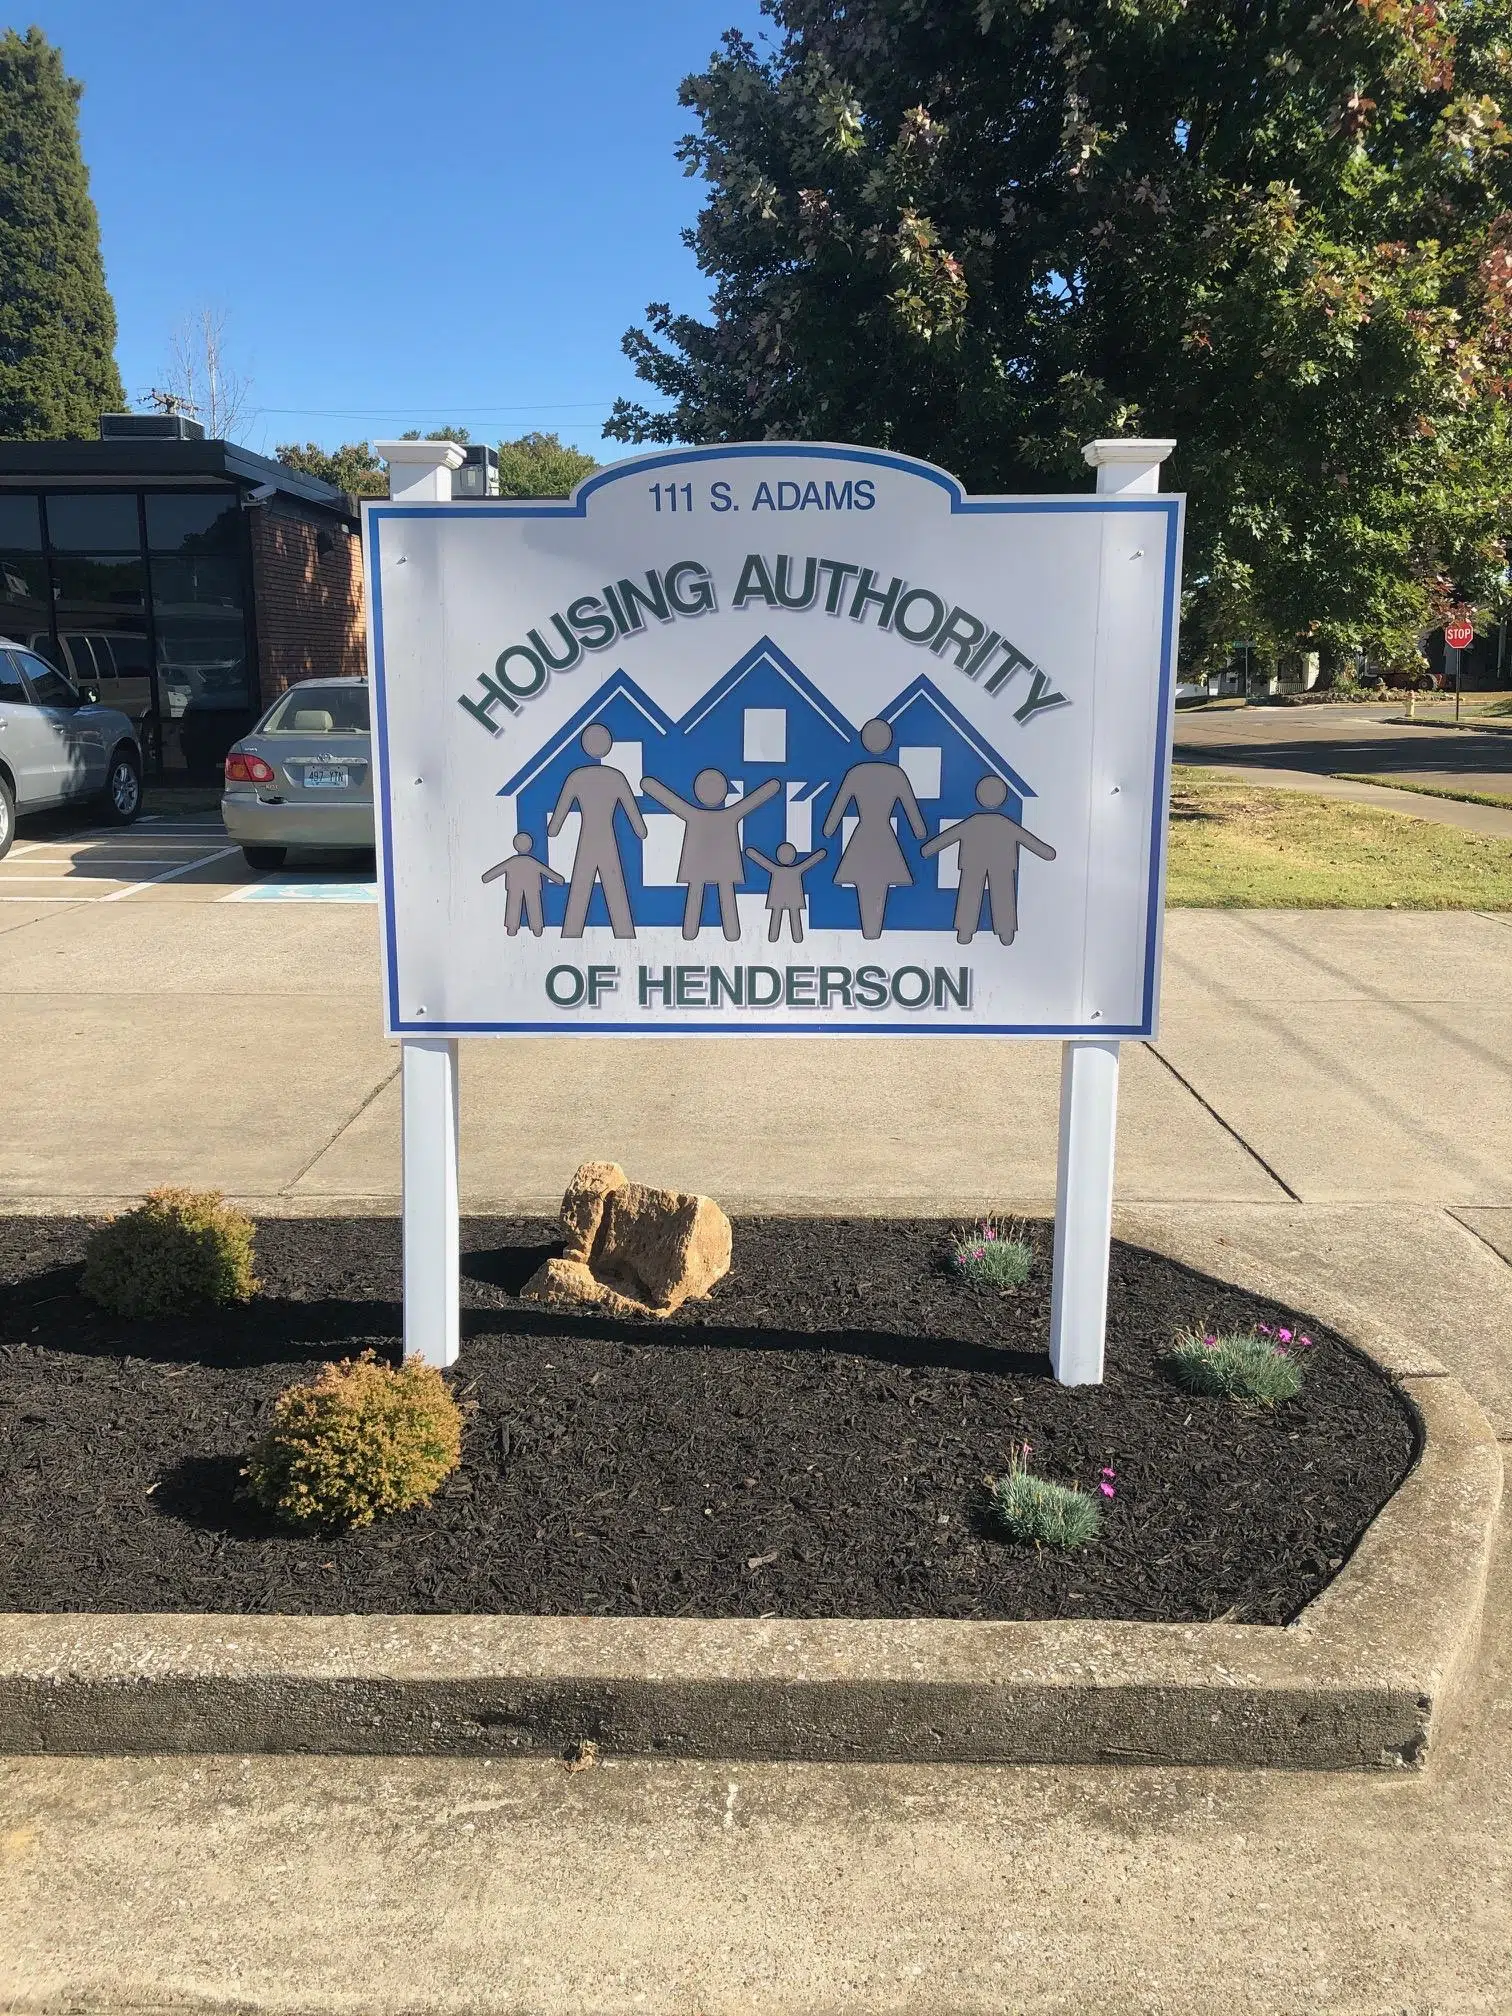 HUD SOUTHEAST REGIONAL ADMINISTRATOR AND LOCAL OFFICIALS TO RECOGNIZE HENDERSON ENVISION CENTER